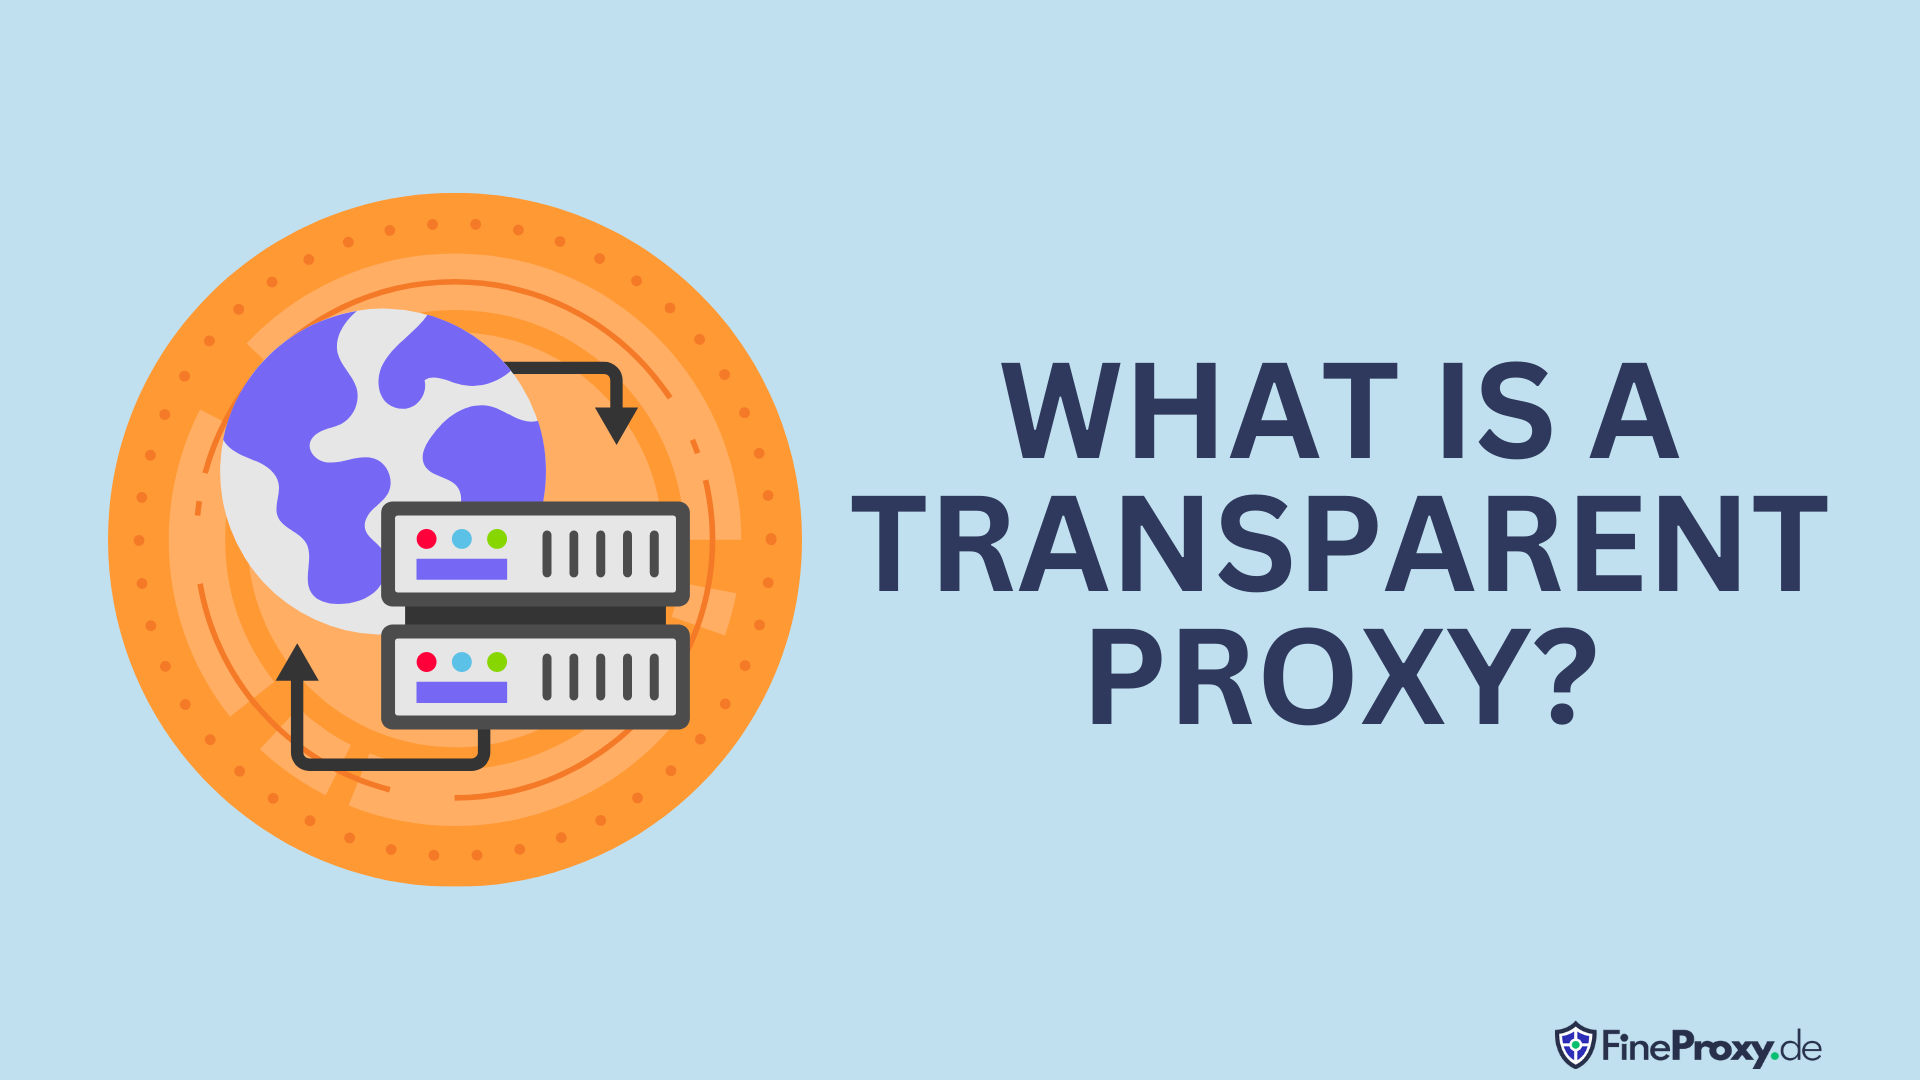 What Is a Transparent Proxy? Exploring Its 5-Step-Settings, Functionalities and 7 Business Applications